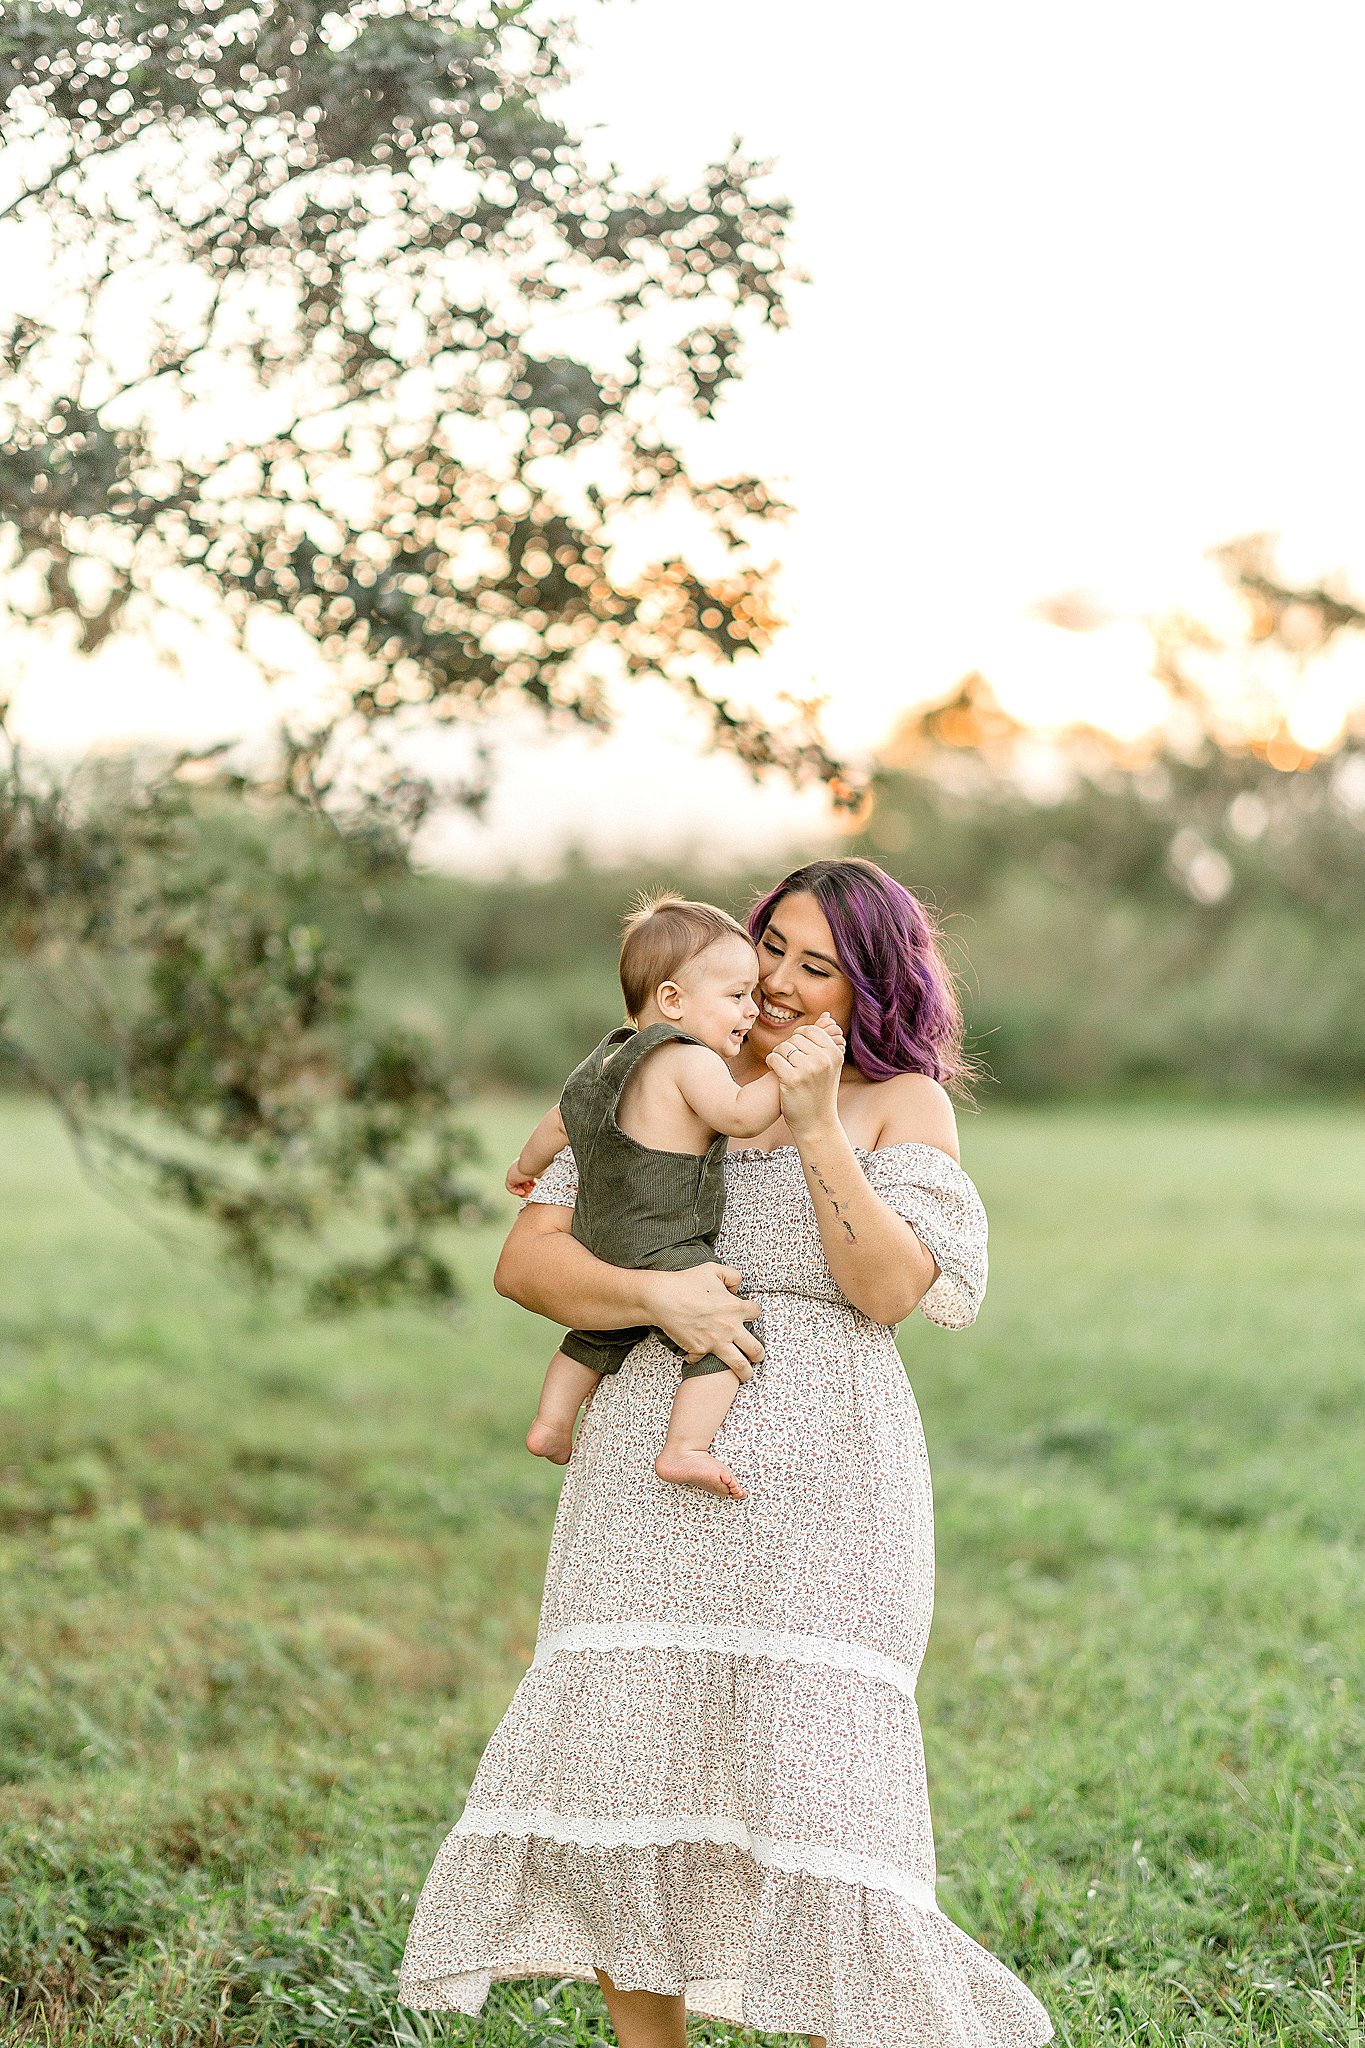 A mom with purple hair dances with her toddler son in green overalls in a grassy field at sunset after miami daycare